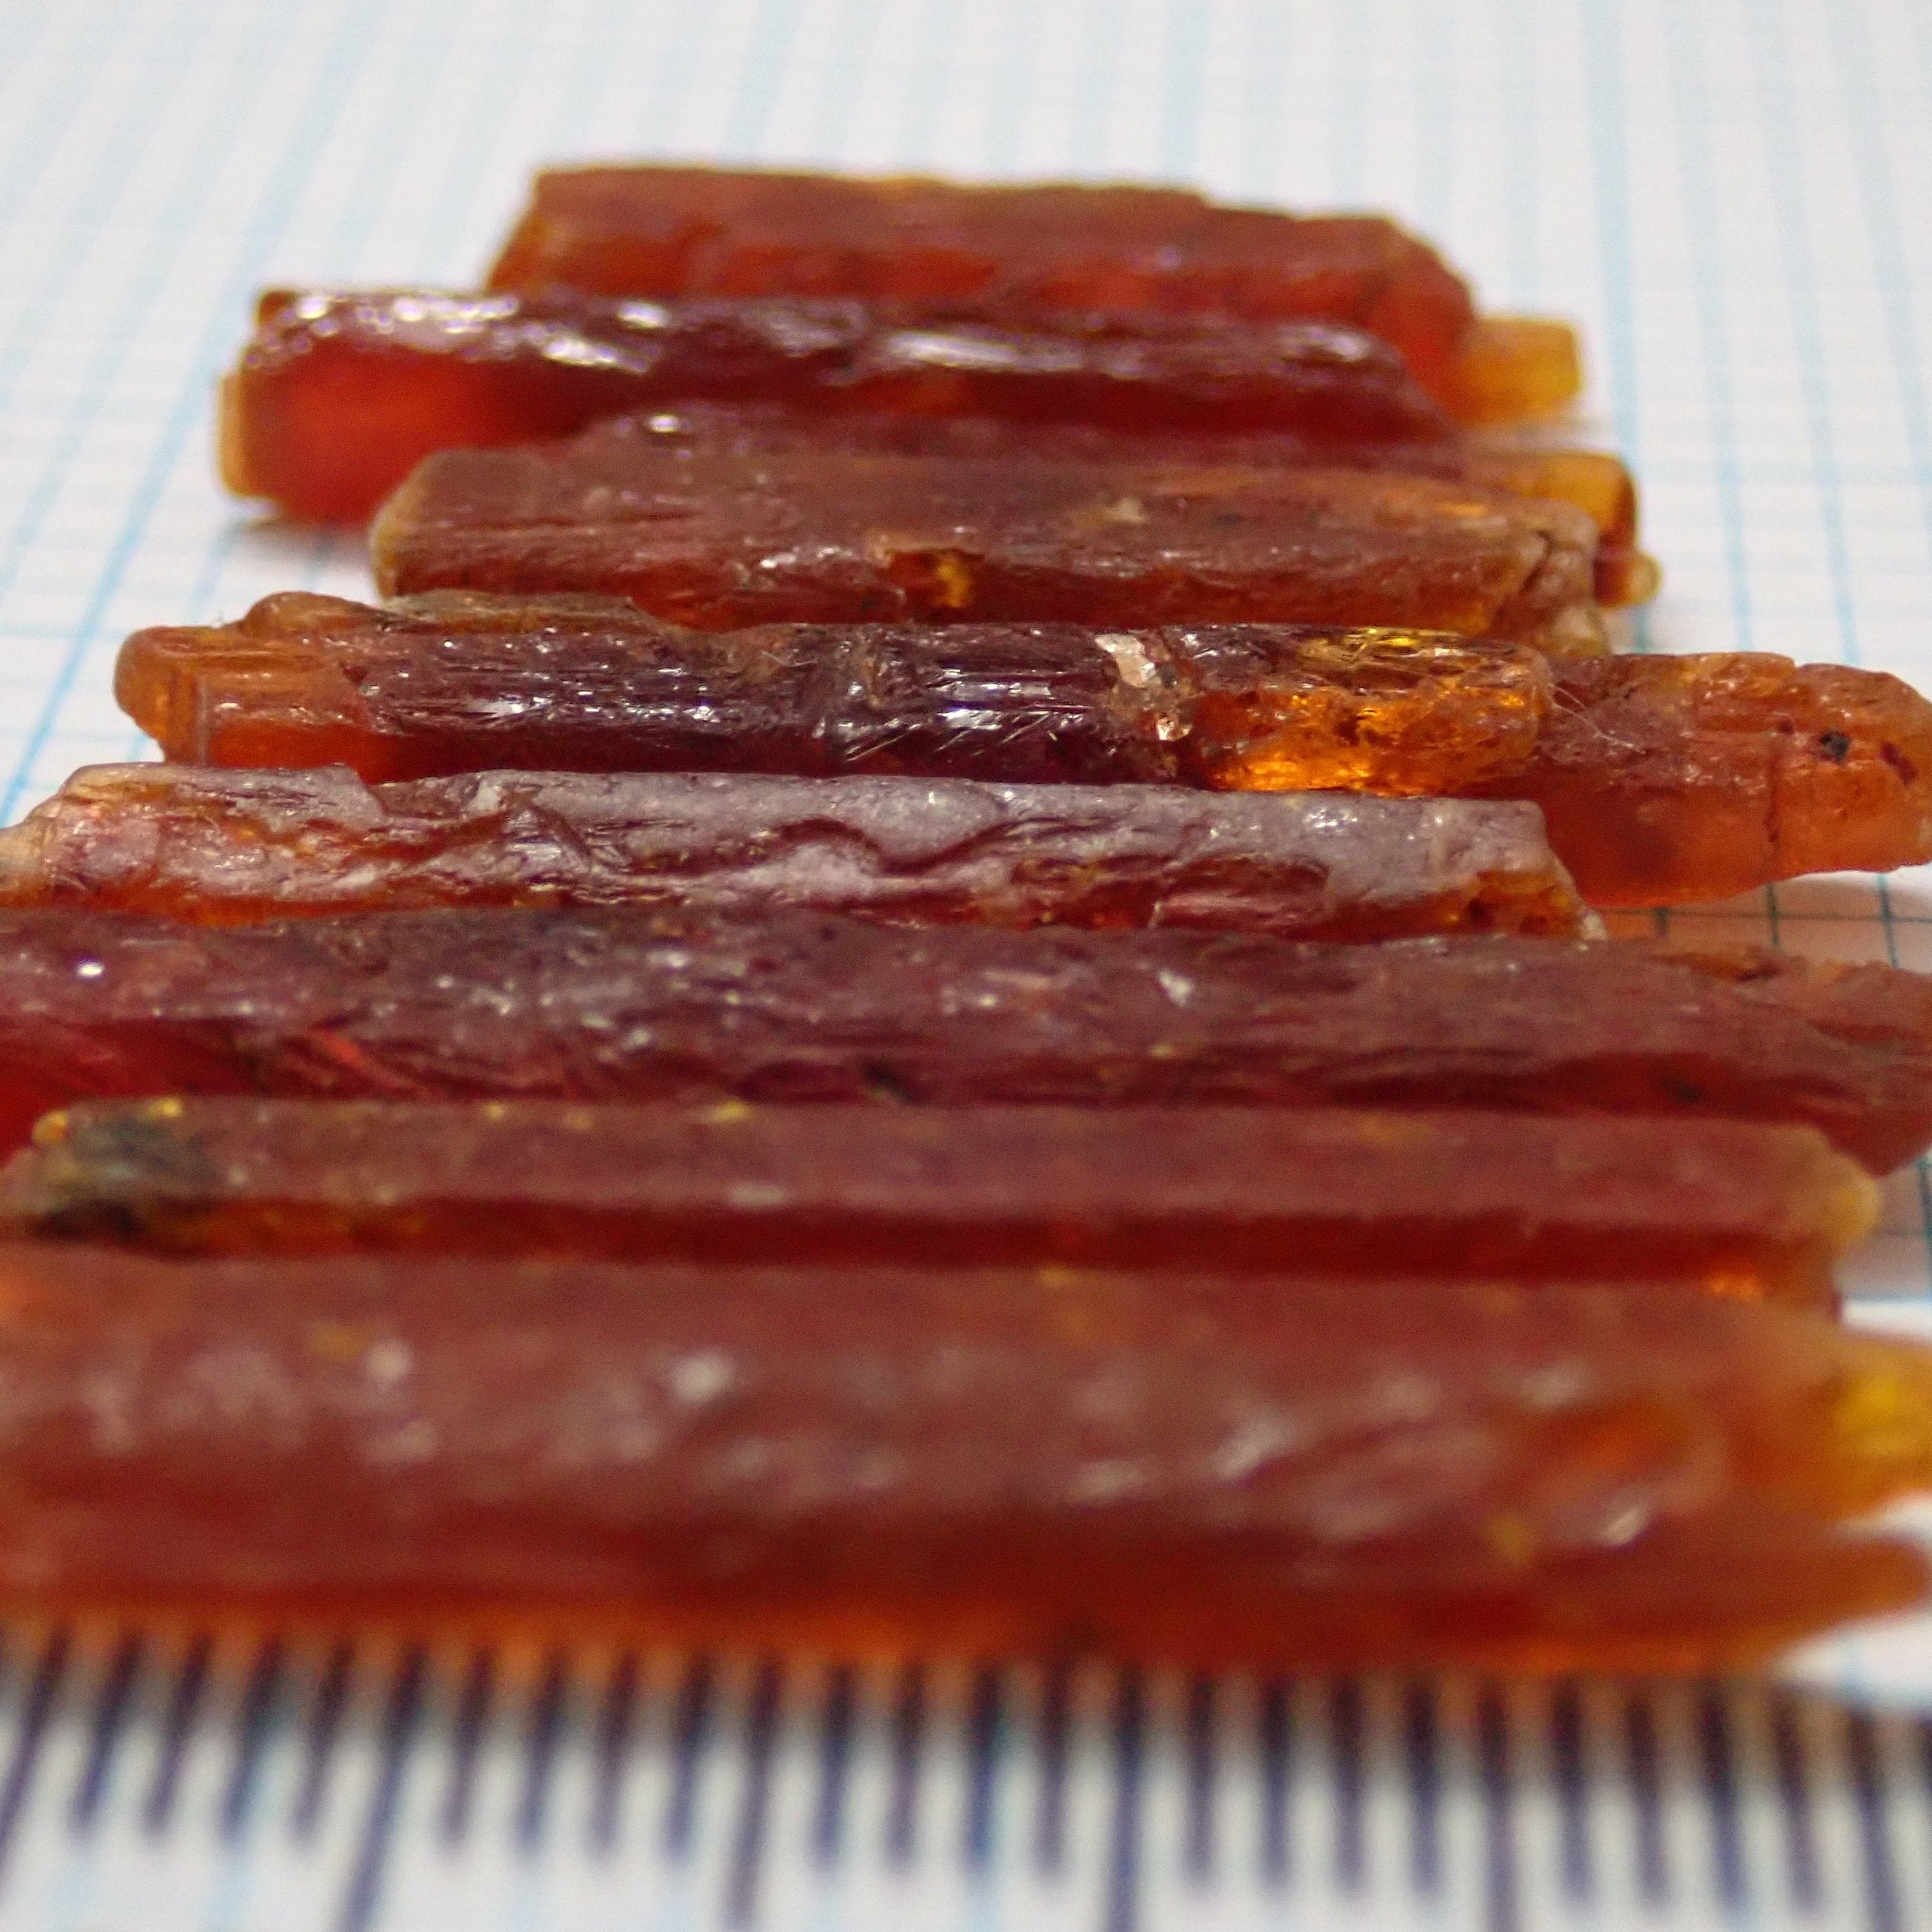 Orange Kyanite Tanzania. 3.5Ct-10Ct Pieces @$6 Per Piece Sold In Lots Of 10 So $60 On Blind Pour